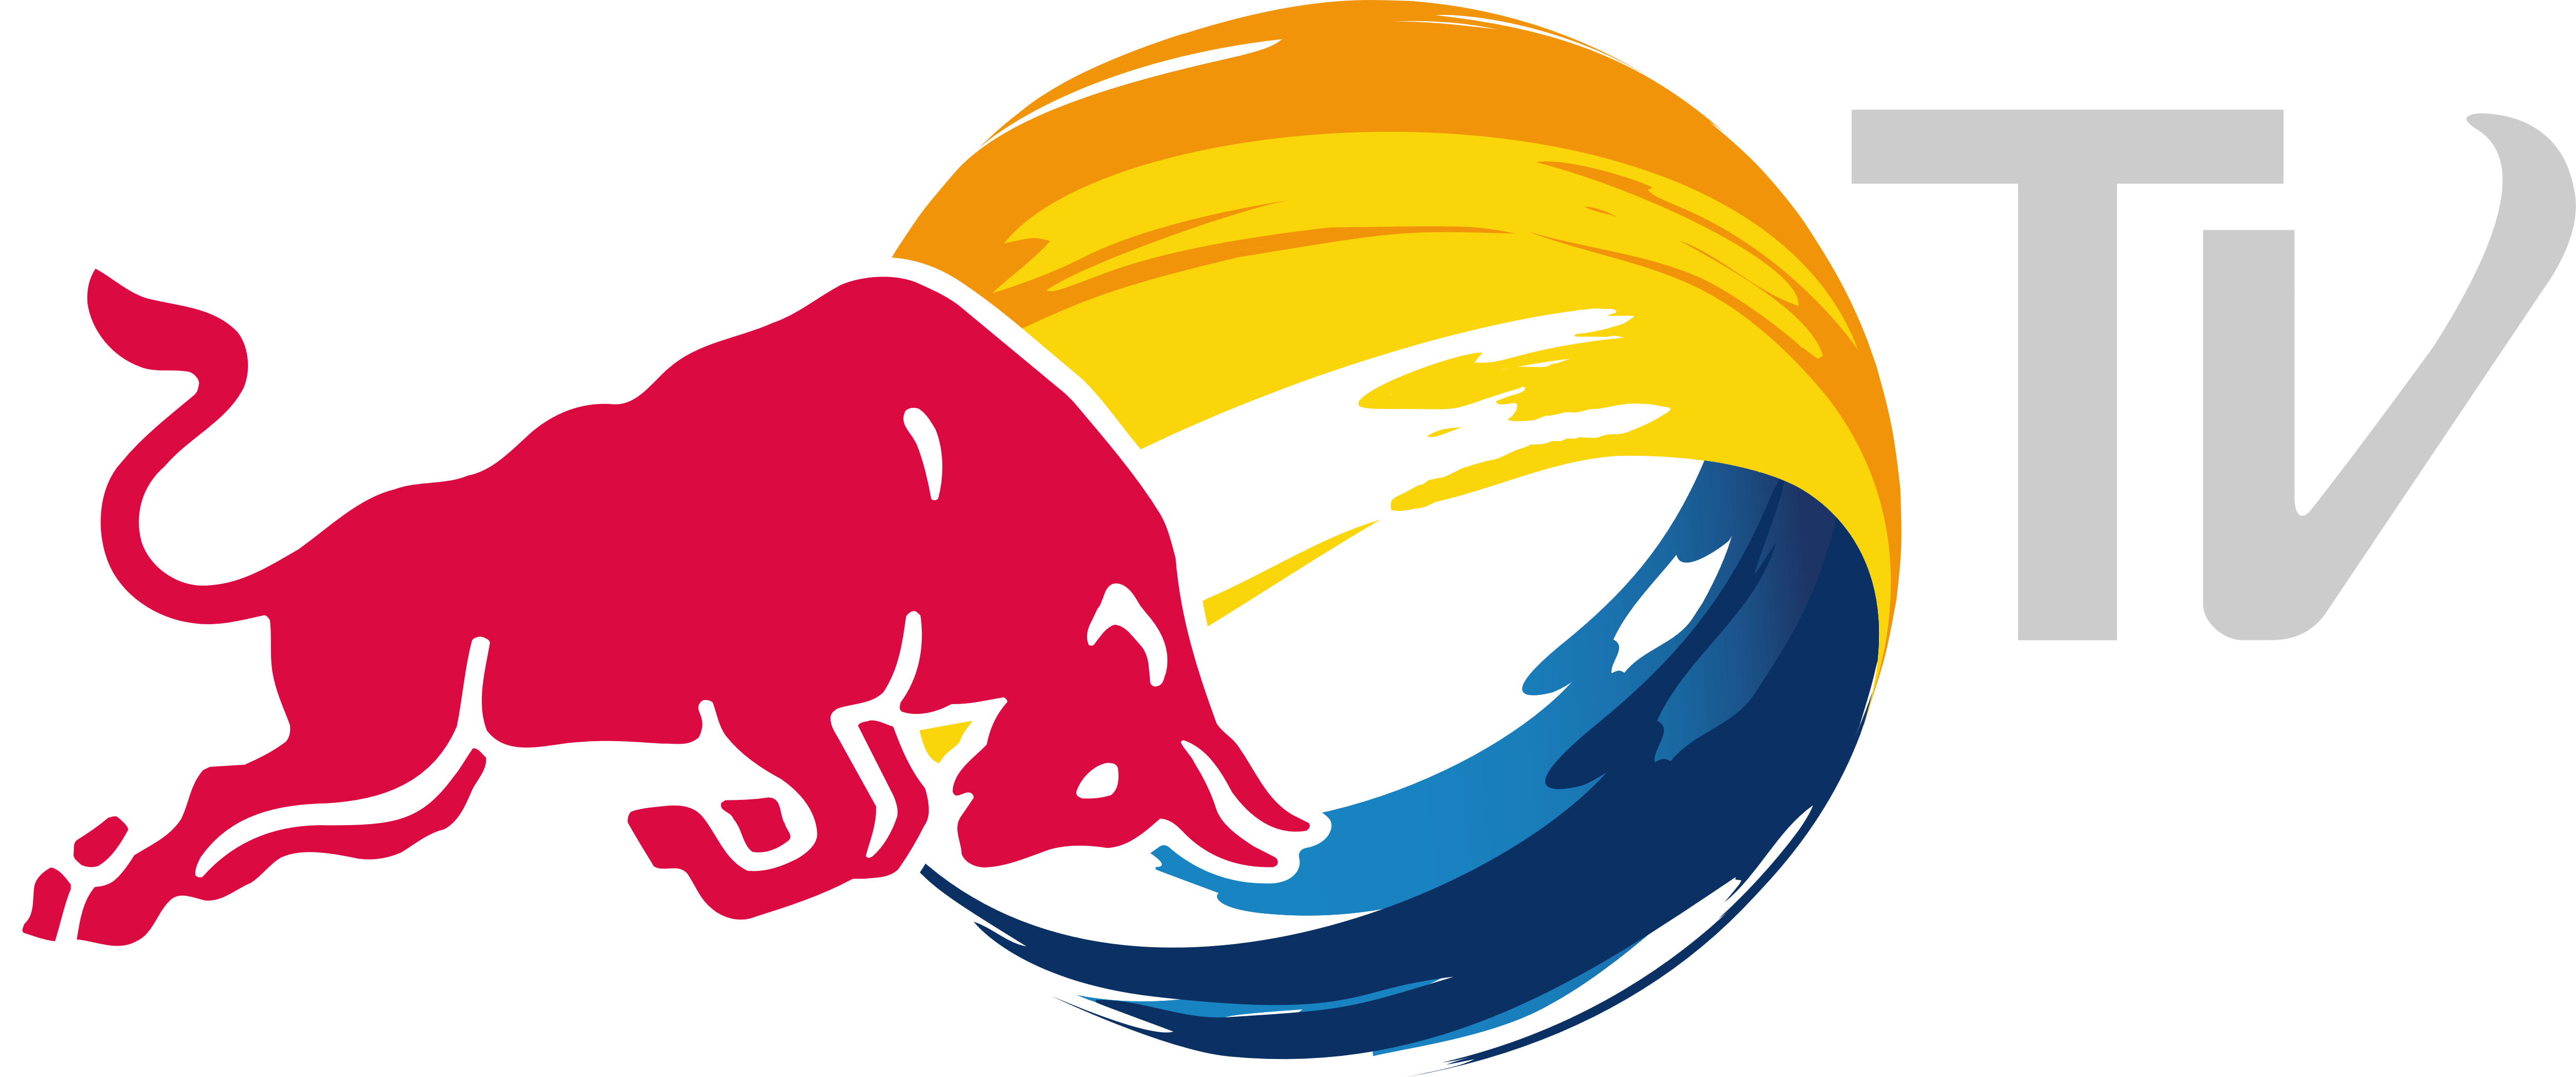 Red Television Logo - Red Bull TV – Logos Download